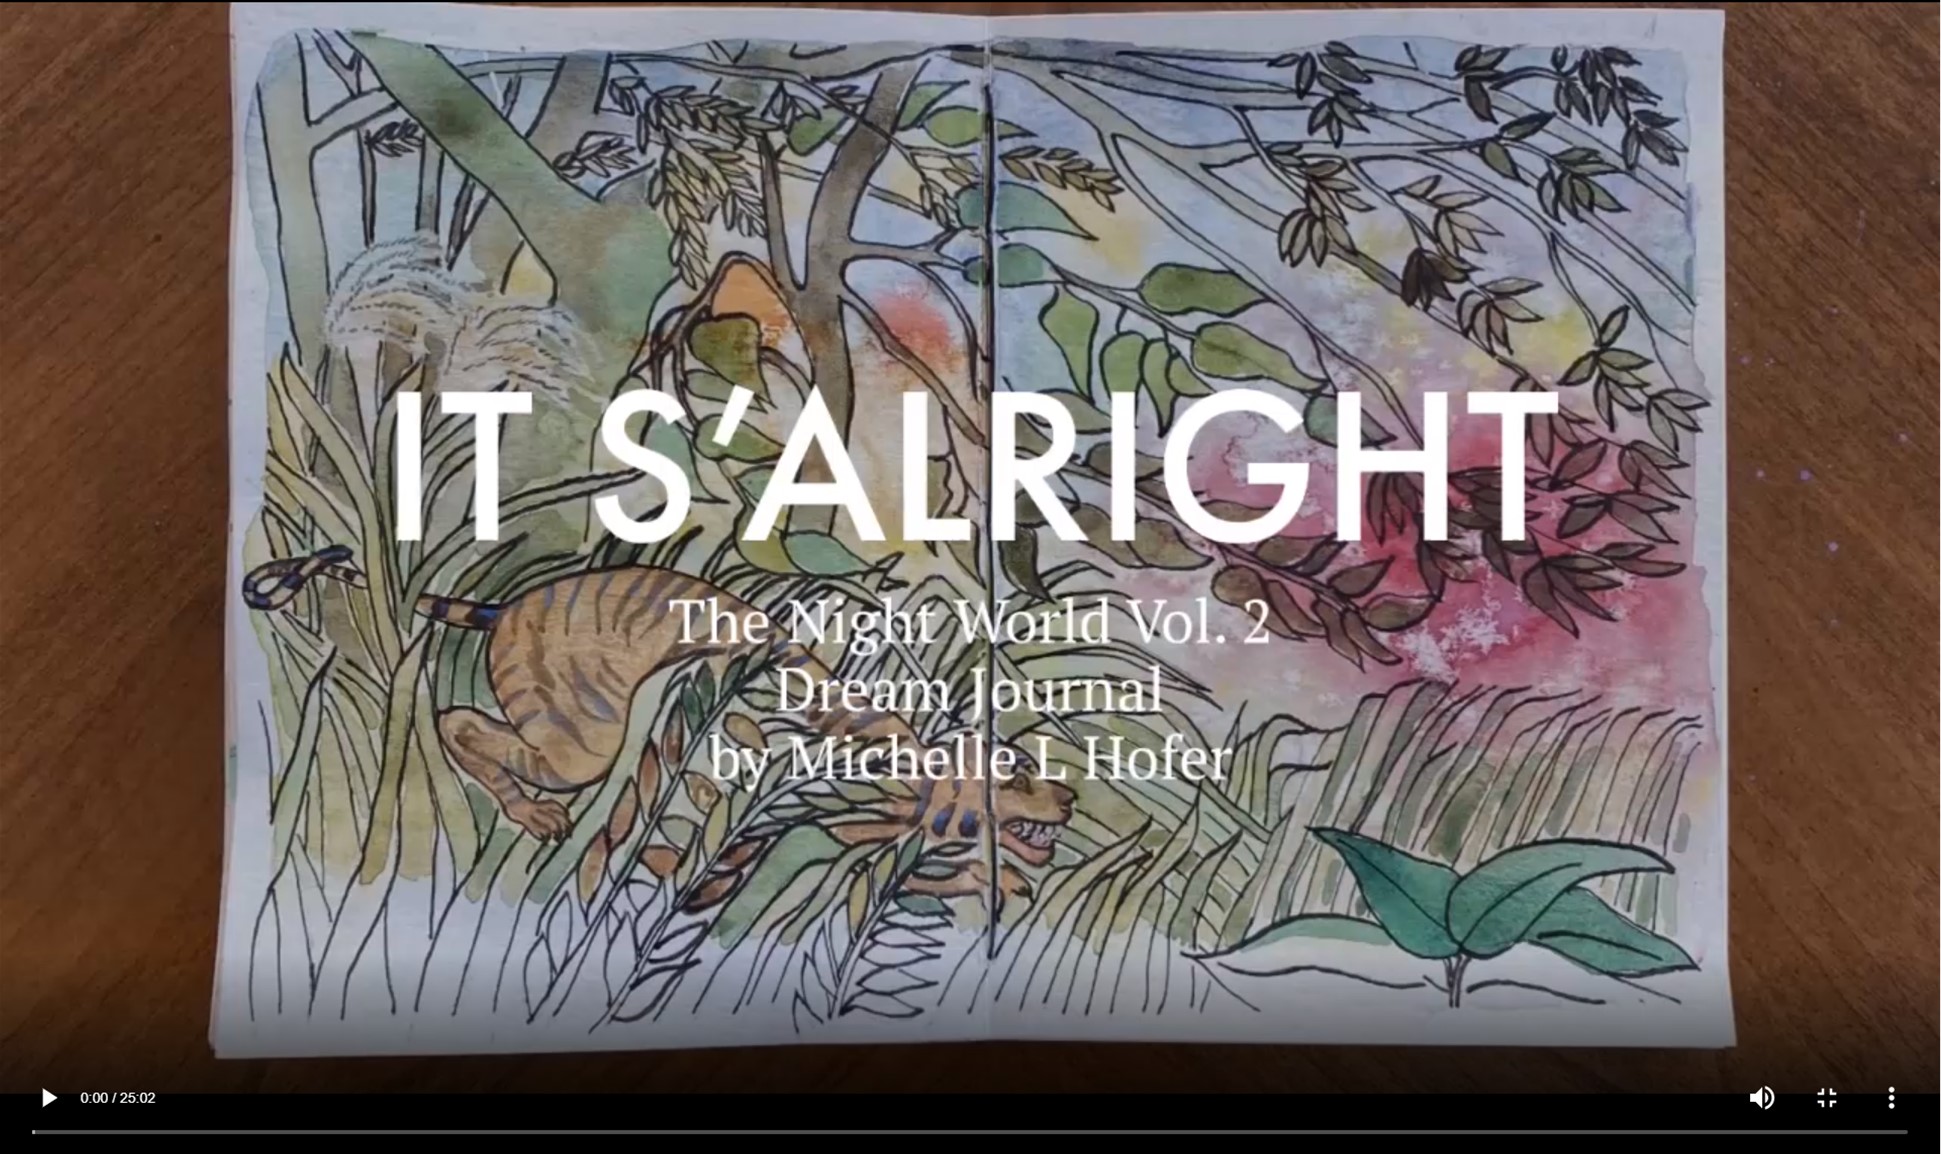 It S'alright Video Link - The Night World Vol. 2 Dream Journal by Michelle L Hofer